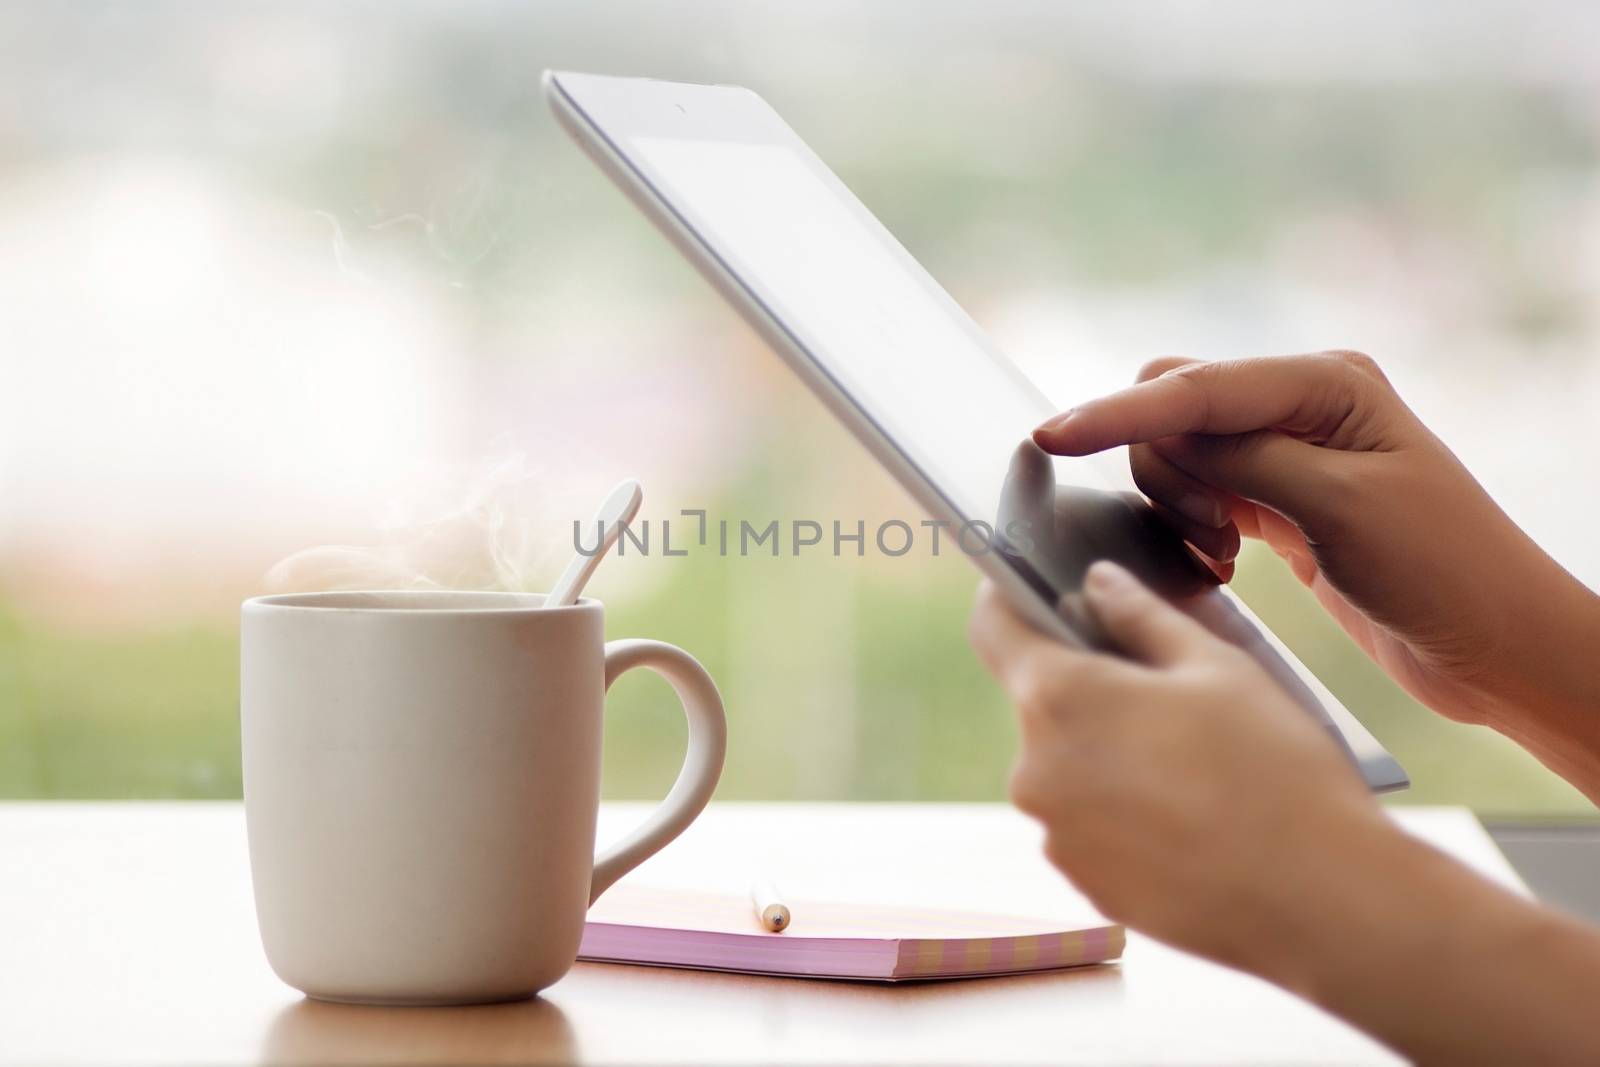 Tablet close up photo with woman hand. Girl using tablet in the cafe and drinking hot coffee. Woman using tablet computer laptop and make note on book with pencil with window glass background